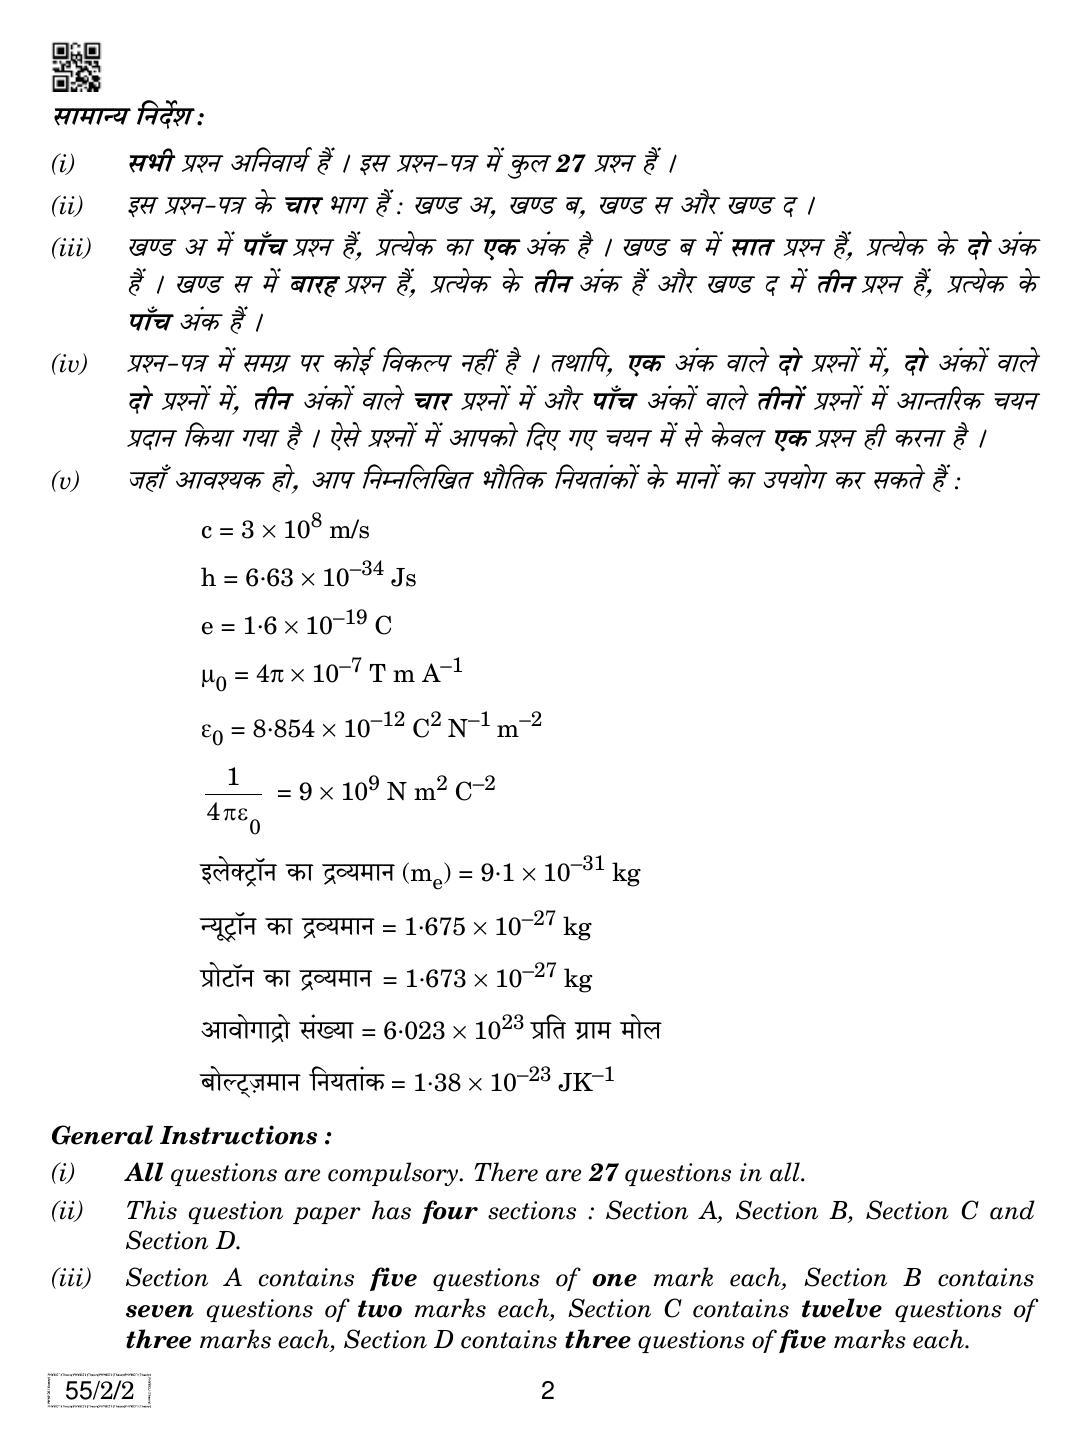 CBSE Class 12 55-2-2 Physics 2019 Question Paper - Page 2